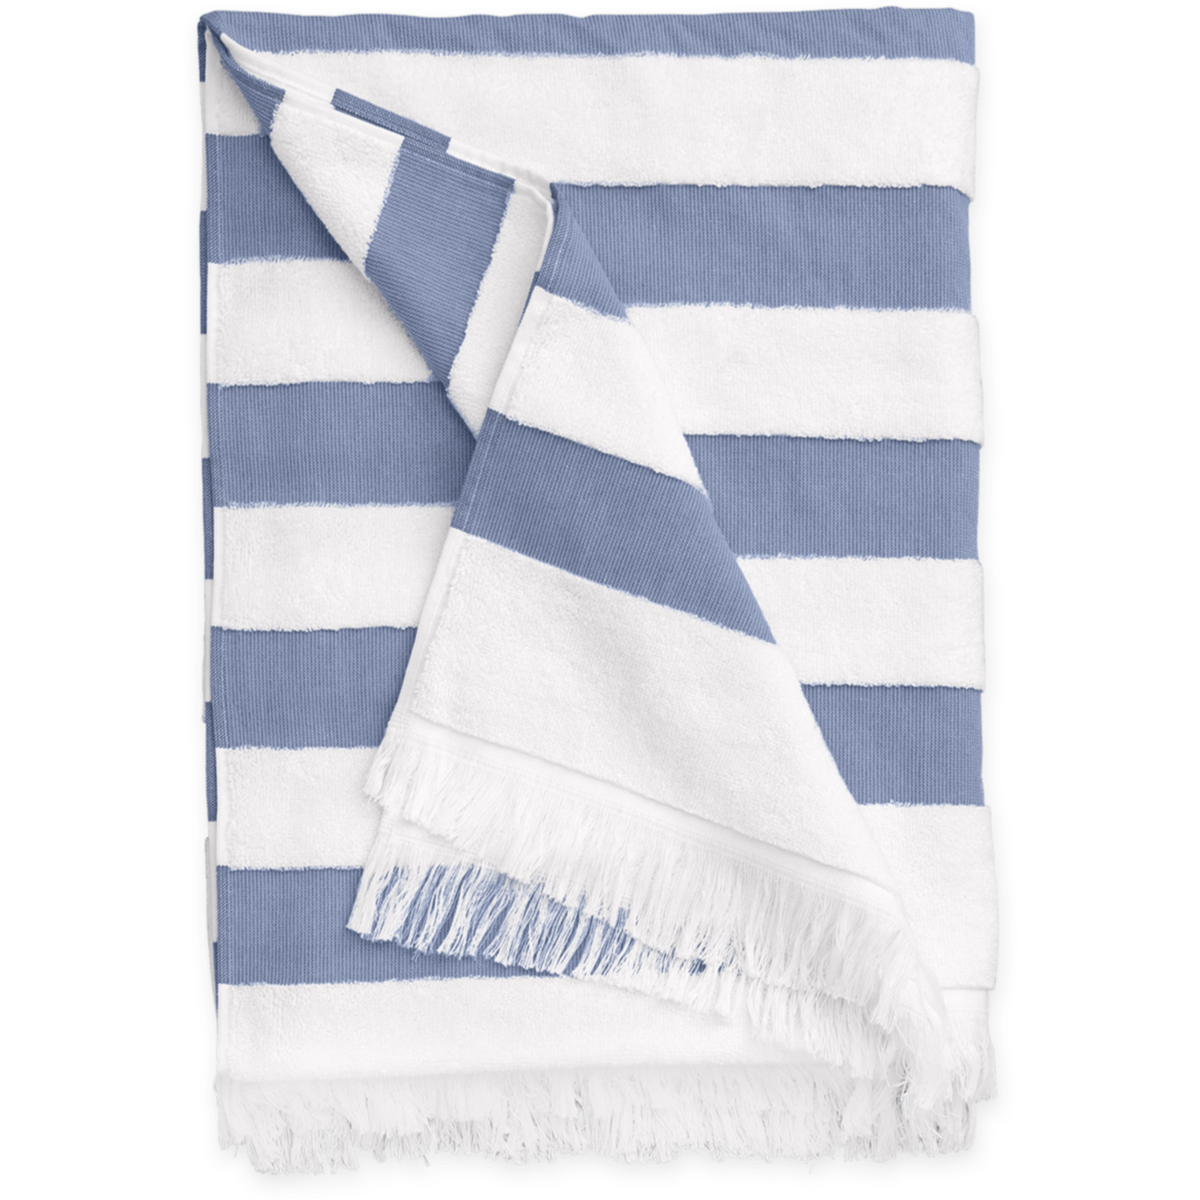 Silo Image of Matouk Amado Pool and Beach Towel in Color Navy